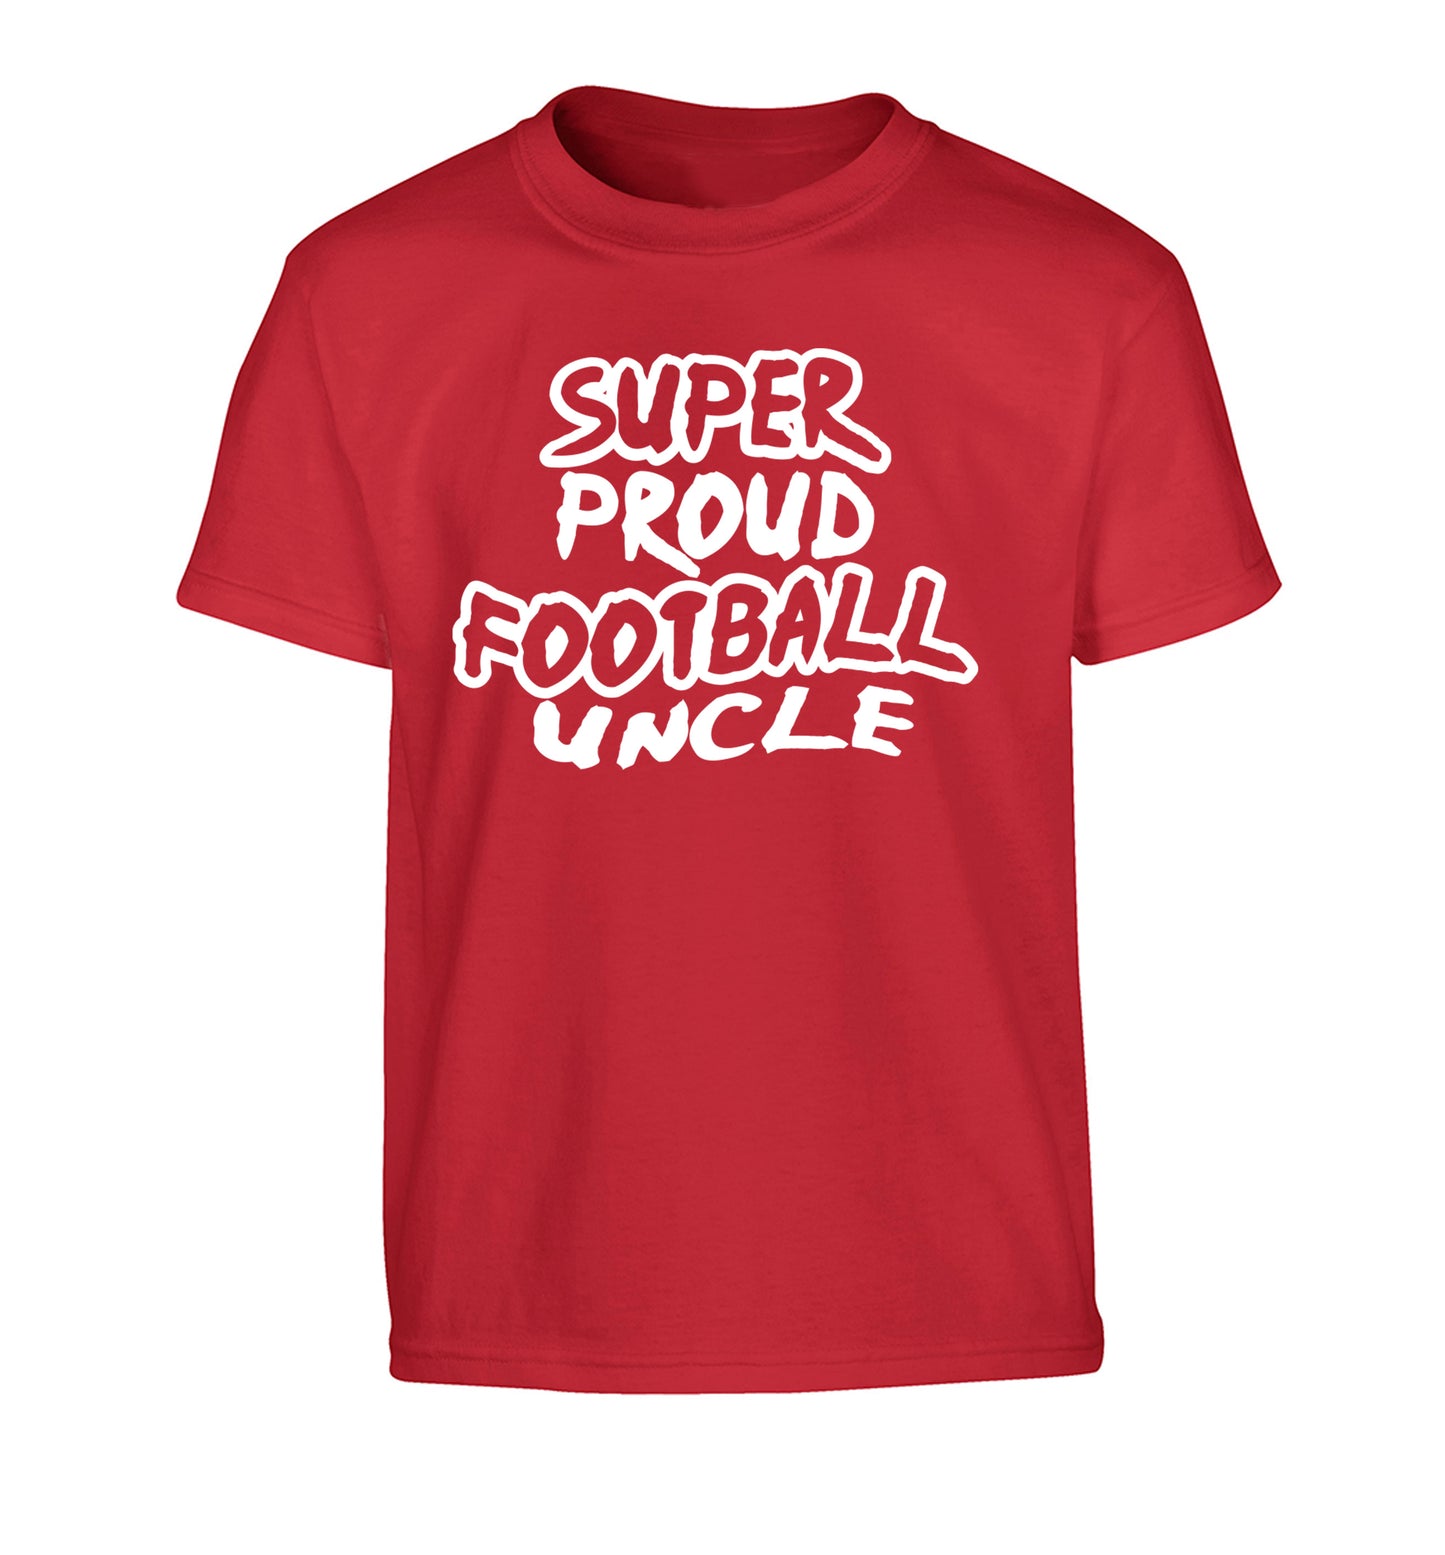 Super proud football uncle Children's red Tshirt 12-14 Years